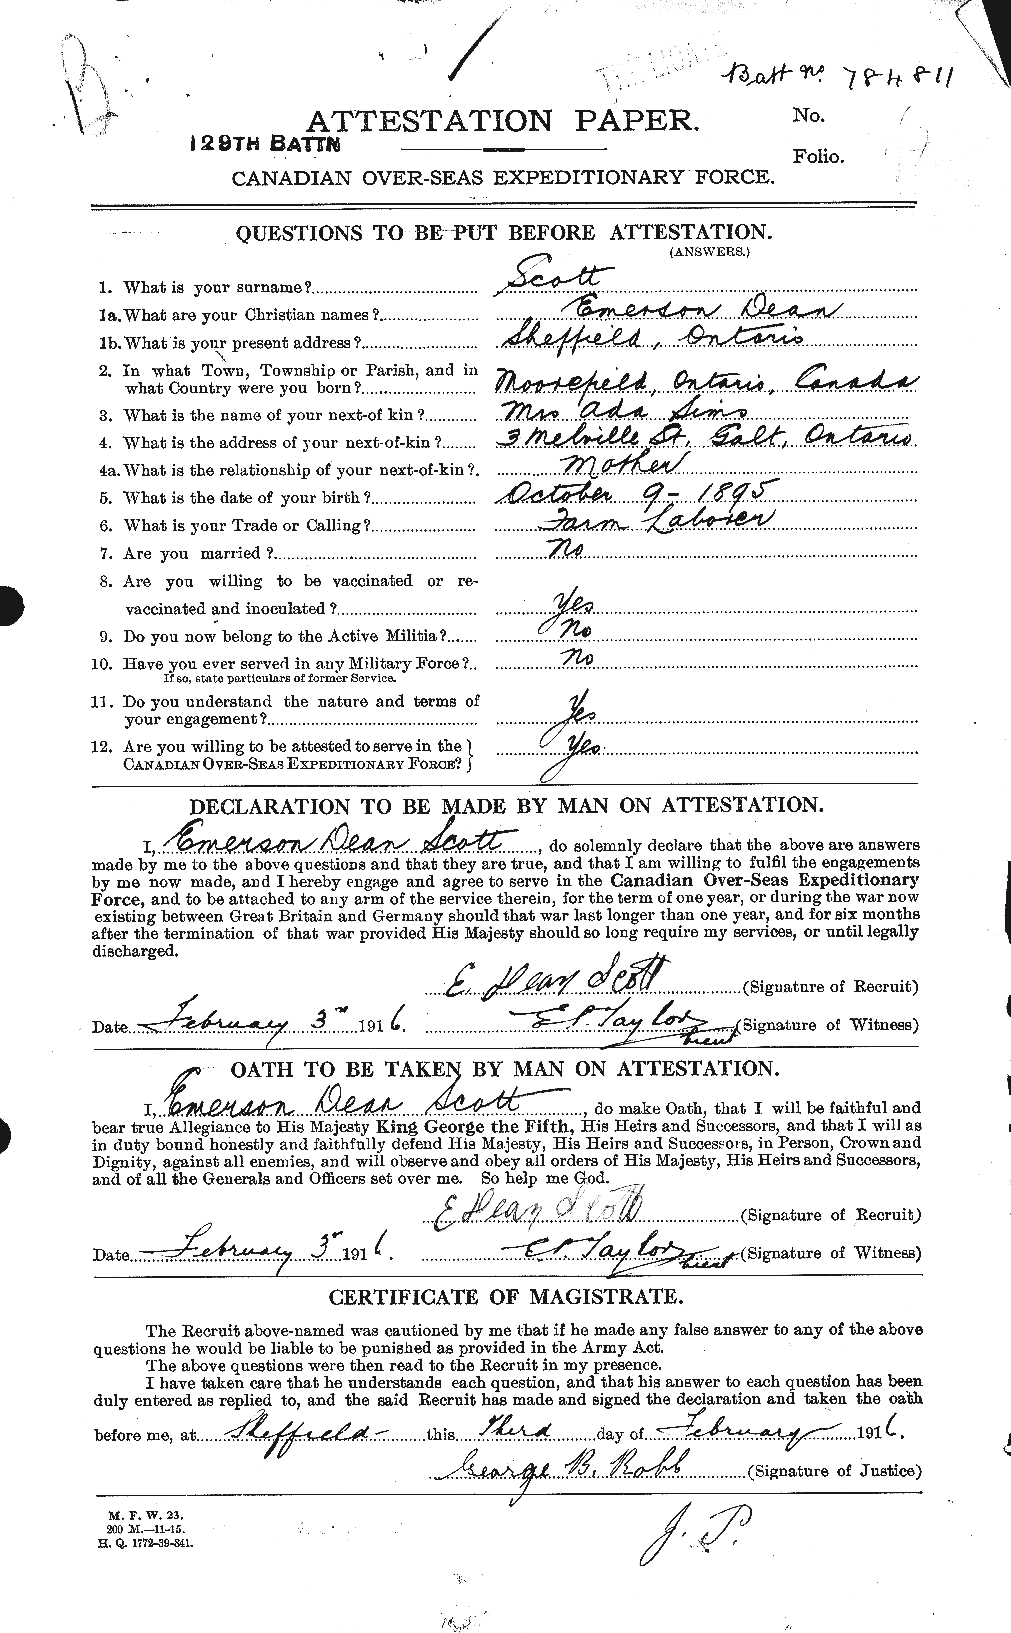 Personnel Records of the First World War - CEF 085030a